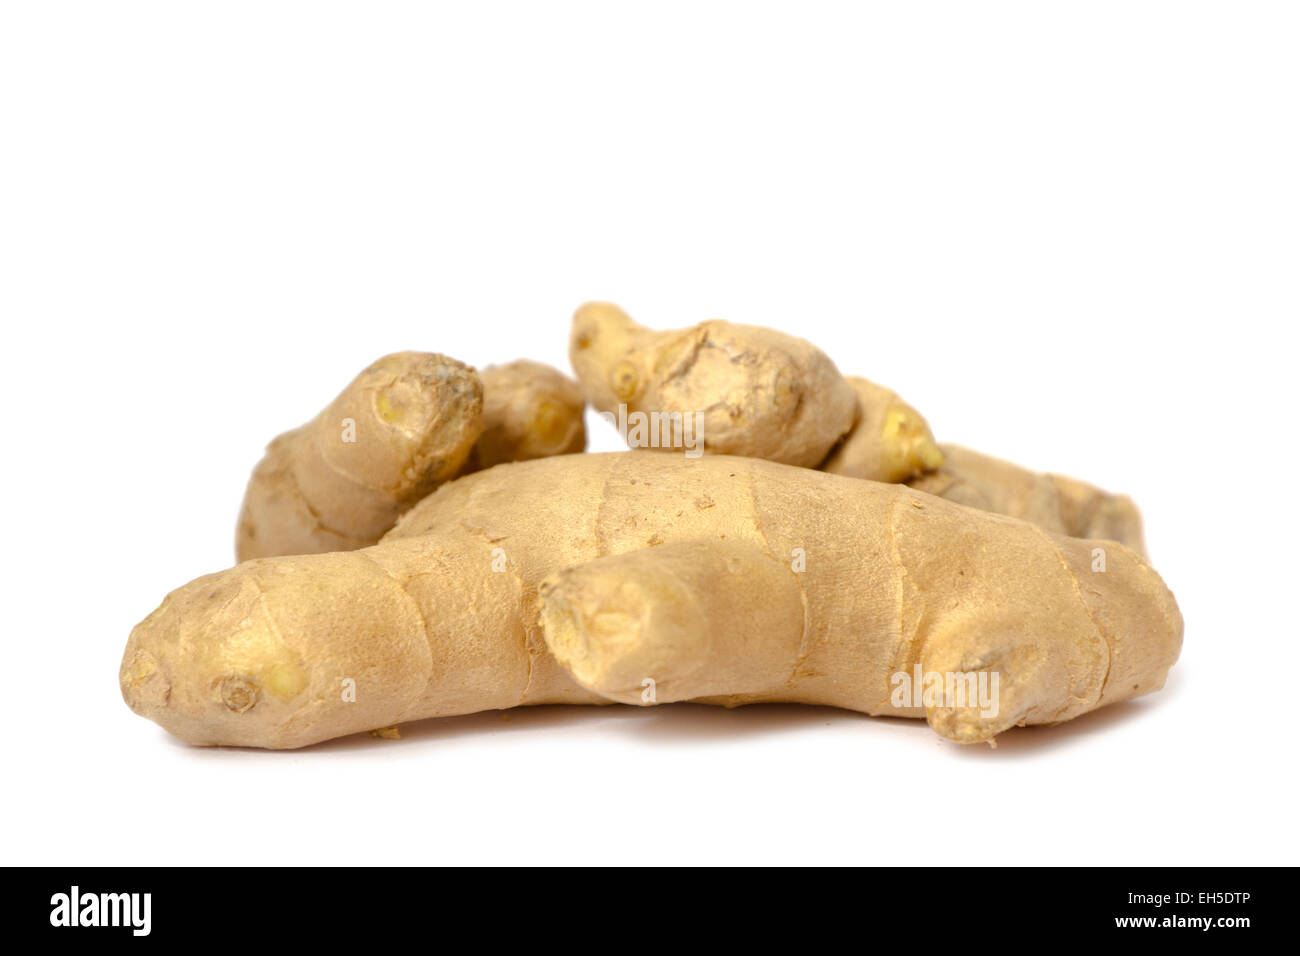 Organic and fresh ginger root on white background. Stock Photo